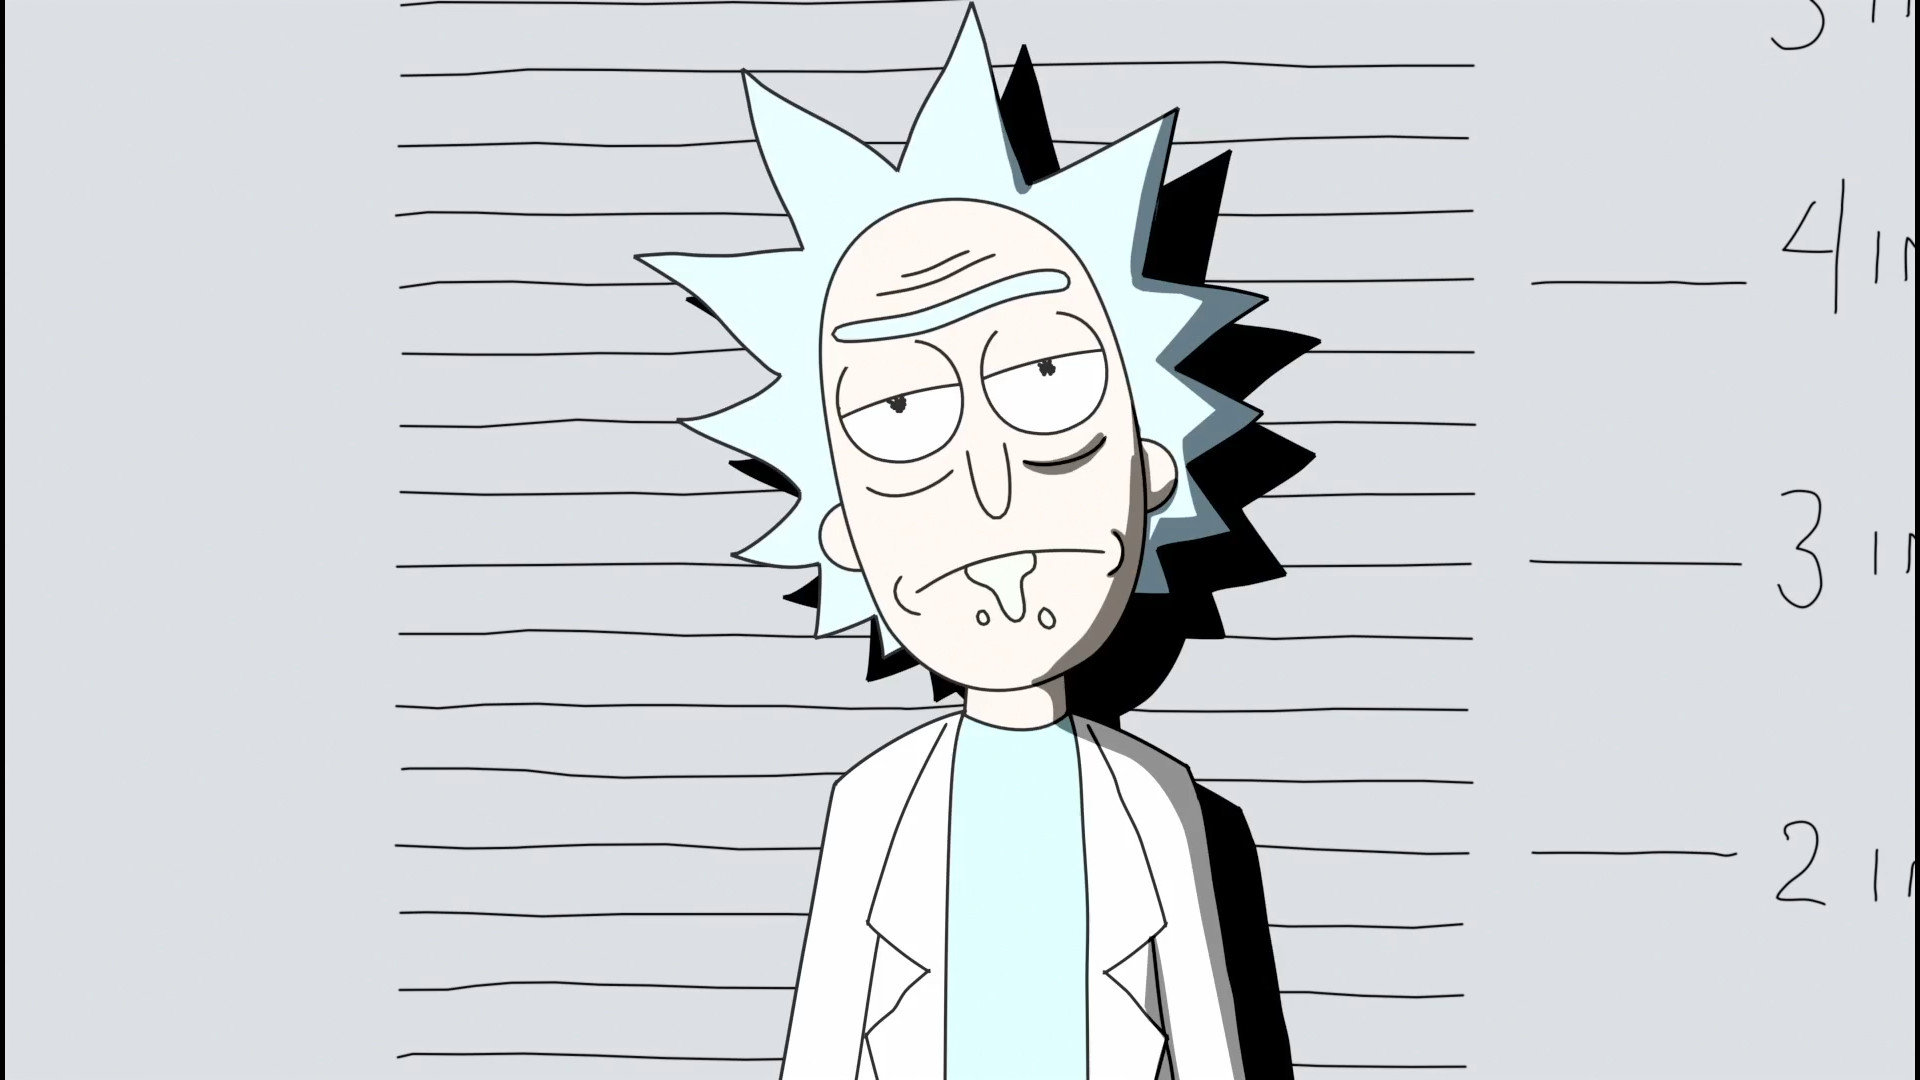 Rick And Morty wallpapers 1920x1080 Full HD (1080p) desktop backgrounds